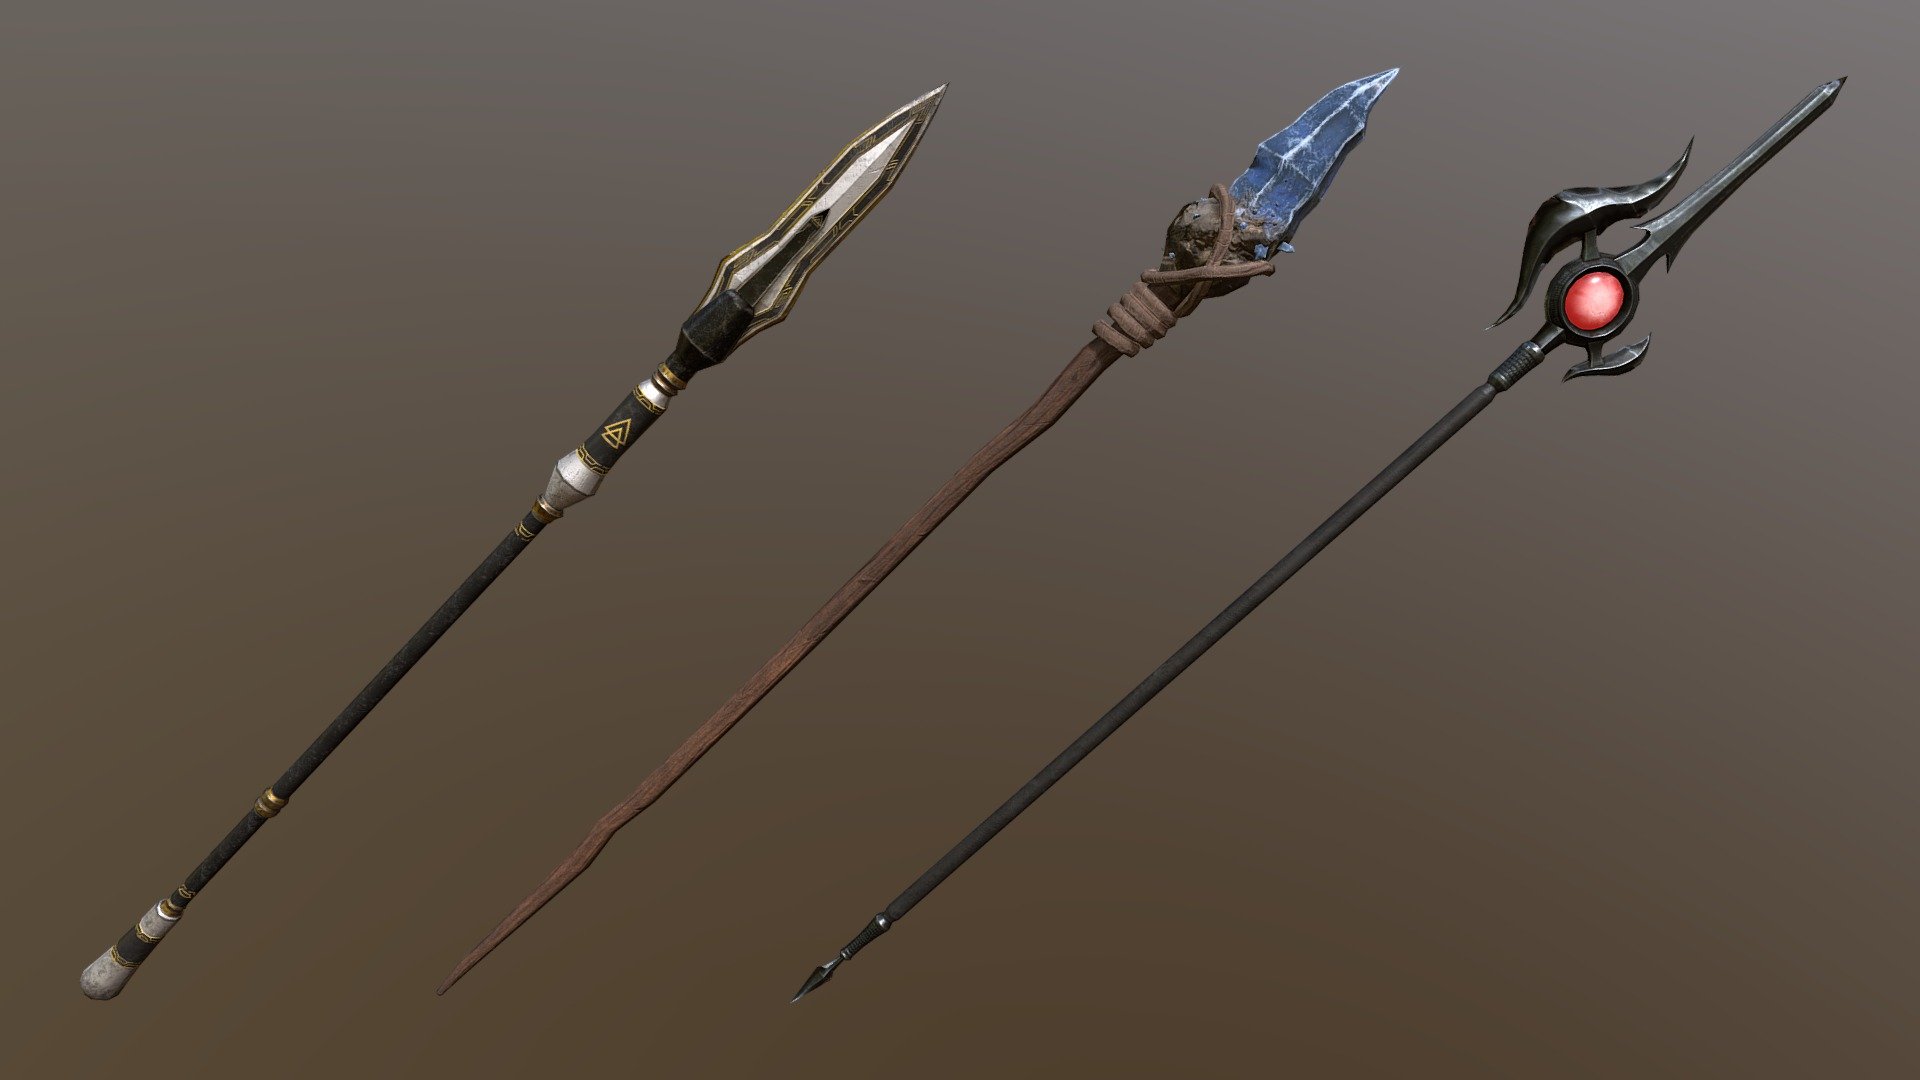 After modelling an environment for my last project, I decided to focus on props this time. I pushed my modelling skills by attempting different spear designs, incorporating shapes that went beyond the typical box-shape. Spear B (middle) was especially challenging given its organic nature, so it was an opportunity to practice sculpting in ZBrush.

I established themes for each spear to ensure each deisgn was unique:
Spear A (left) - Science Fantasy (inspired by the Prime weapons of Warframe)
Spear B (middle) - Primitive
Spear C (right) - Magic

Tri Count:
Spear A - 986
Spear B - 1072
Spear C - 1498

Modelled in Maya
Sculpted in ZBrush (only Spear B)
Textured in Substance Painter - Spear Designs - 3D model by Dylan Koroivatu (@DylanKoroivatu) 3d model